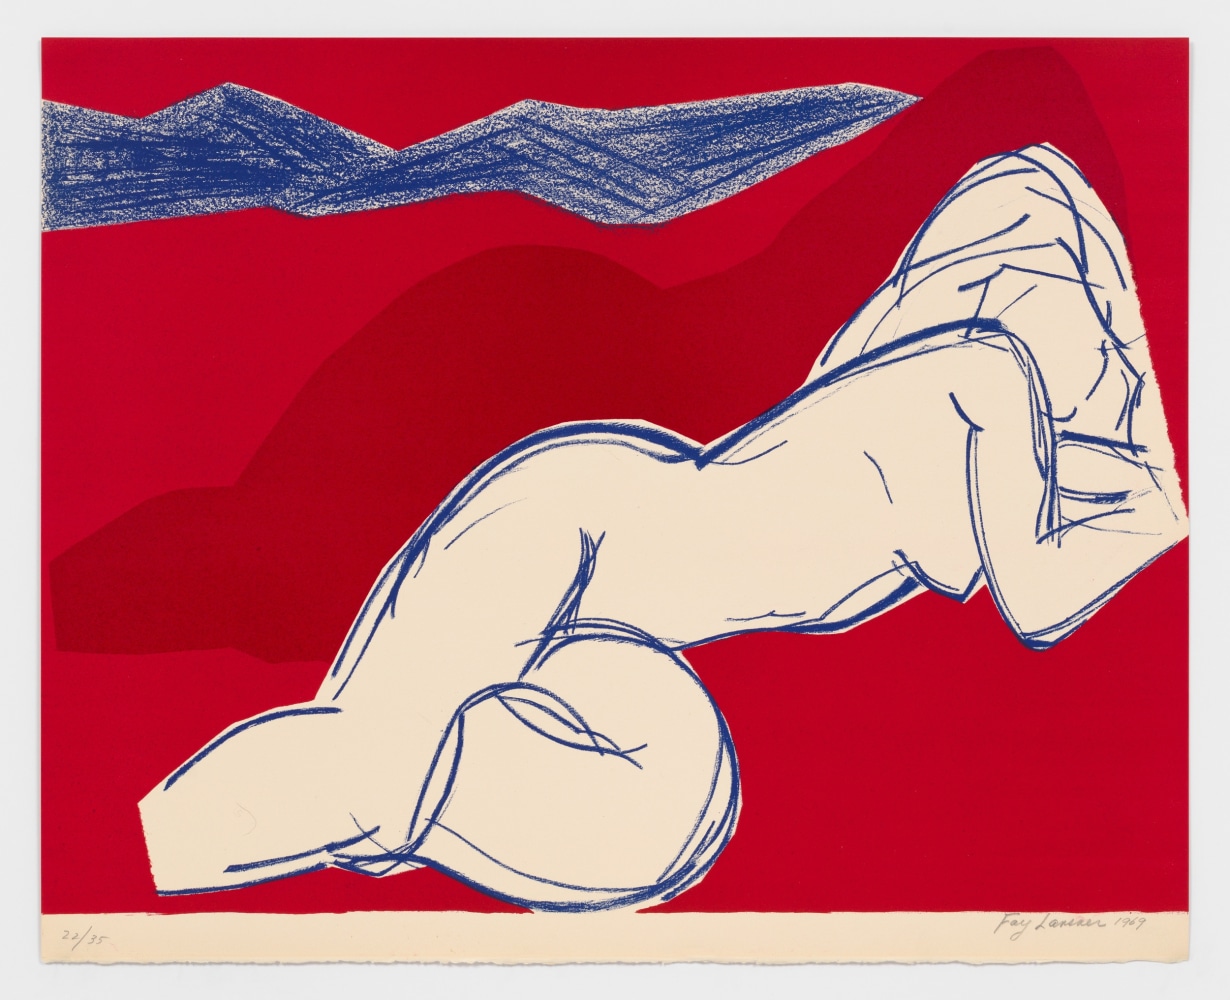 Fay Lansner

Red and Blue,&amp;nbsp;1968

lithograph, edition of 35

21 1/2 x 26 3/4 in. / 54.6 x 68 cm